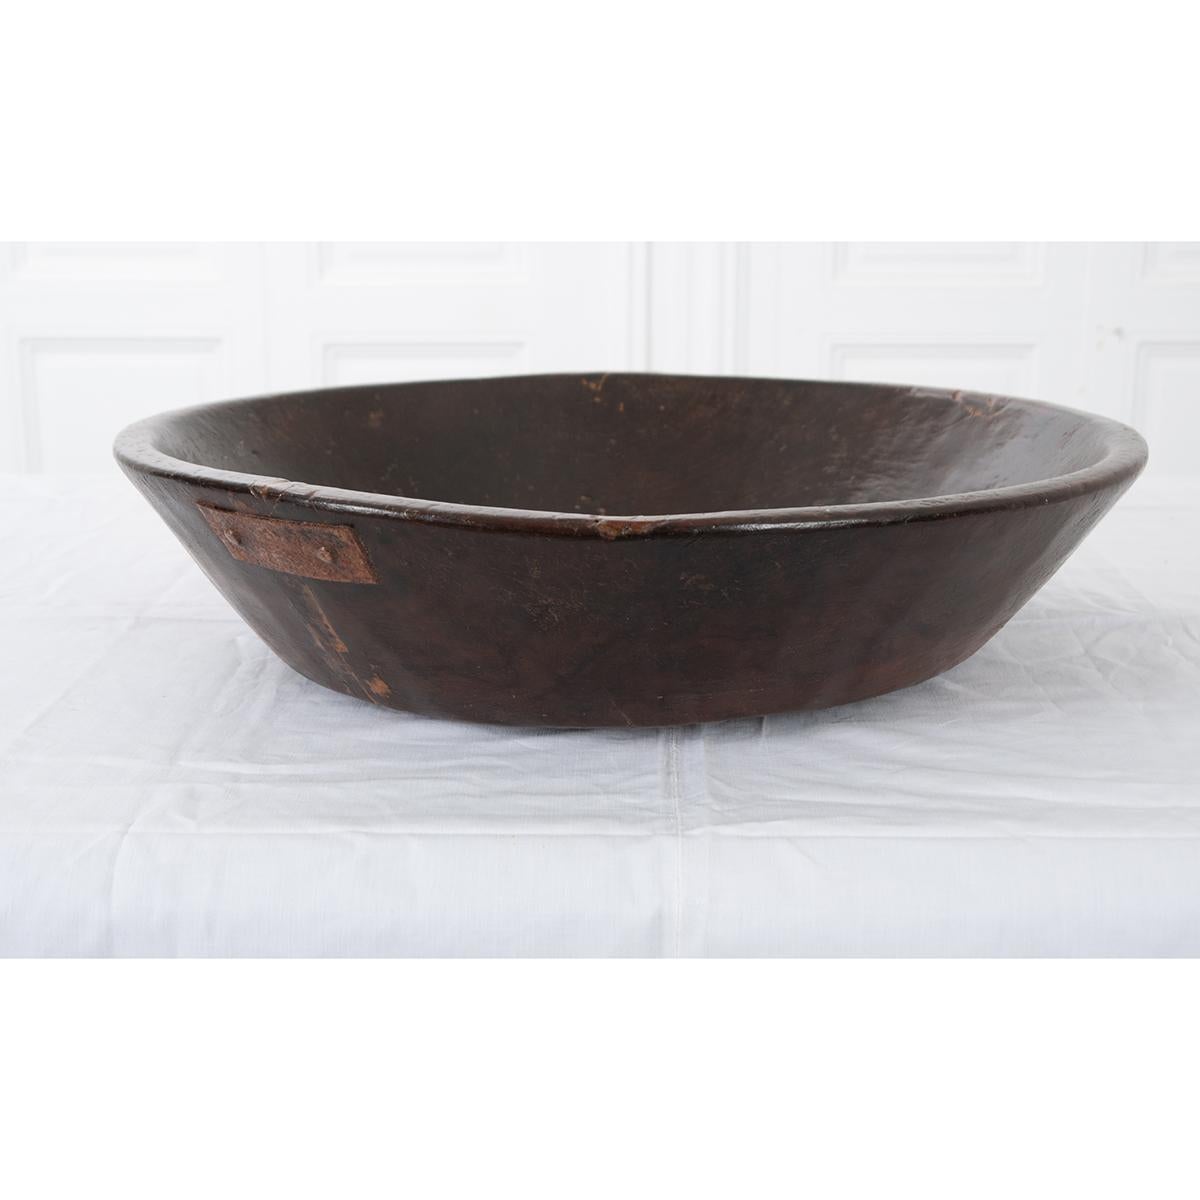 This is an English 19th century hand carved wood bowl - well used and beautiful. It has a metal patch on the side to strenghten it. The bowl would look great on any table or kitchen island. Circa 1850.